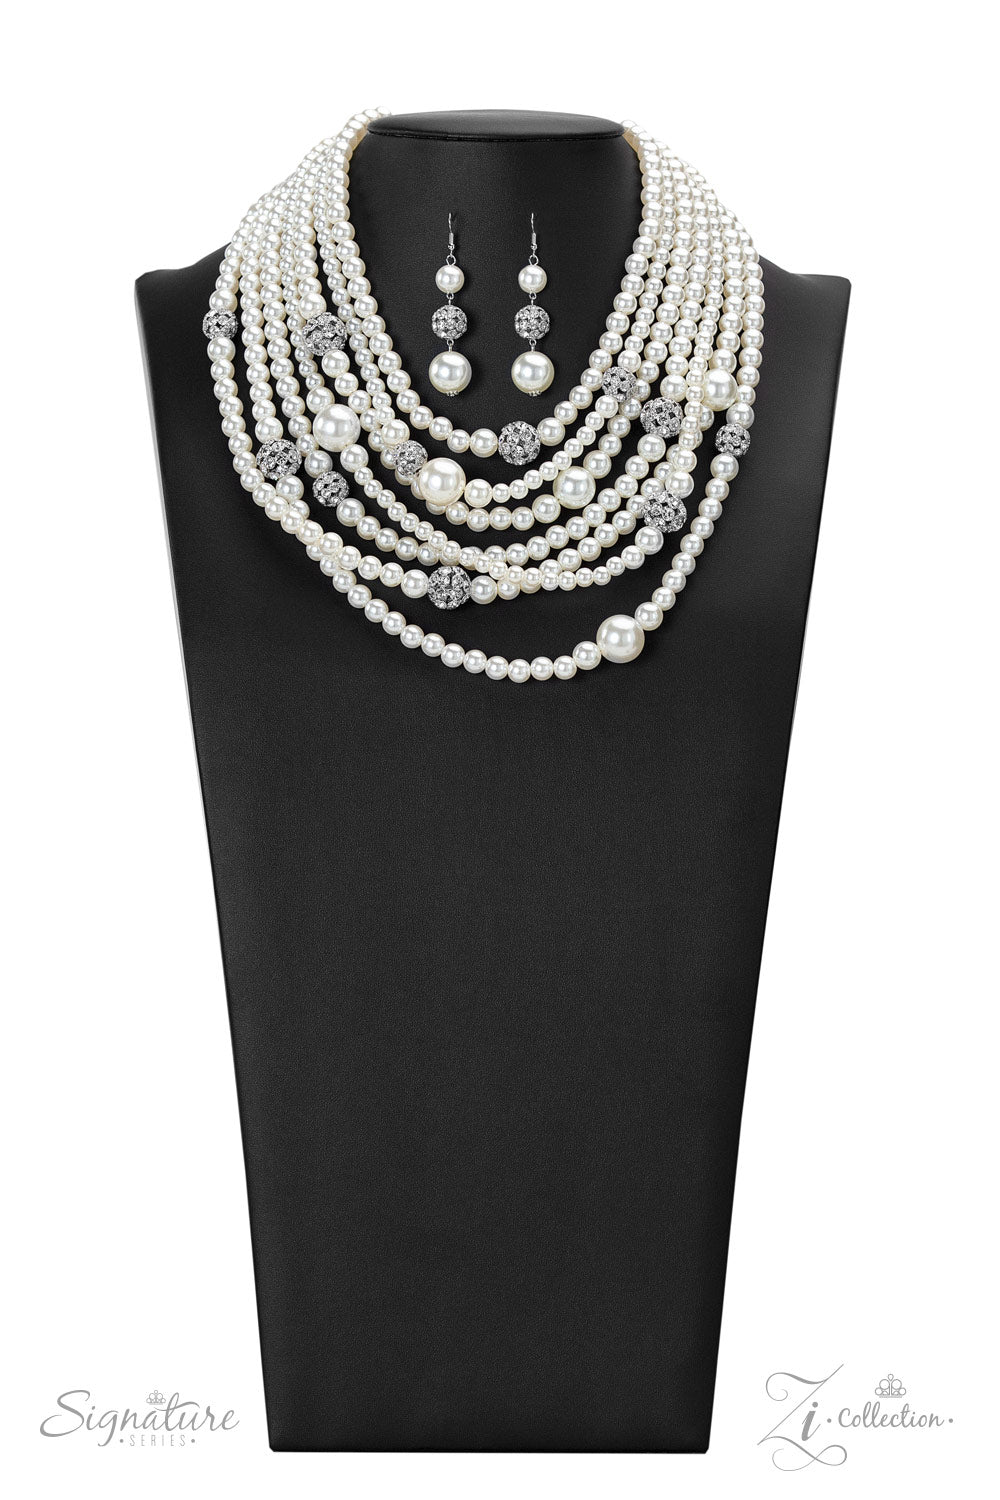 Paparazzi Accessories The Courtney - 2022 Signature Zi Collection Necklace strand after strand of lustrous white pearls layer down the chest, creating timeless tiers. Airy silver spheres, adorned in sparkling white rhinestones, are effortlessly sprinkled among the sea of pearls, infusing the design with capricious shimmer, while larger pearl beads add dimension and depth to this classic motif. Features an adjustable clasp closure.  Sold as one individual necklace. Includes one pair of matching earrings.